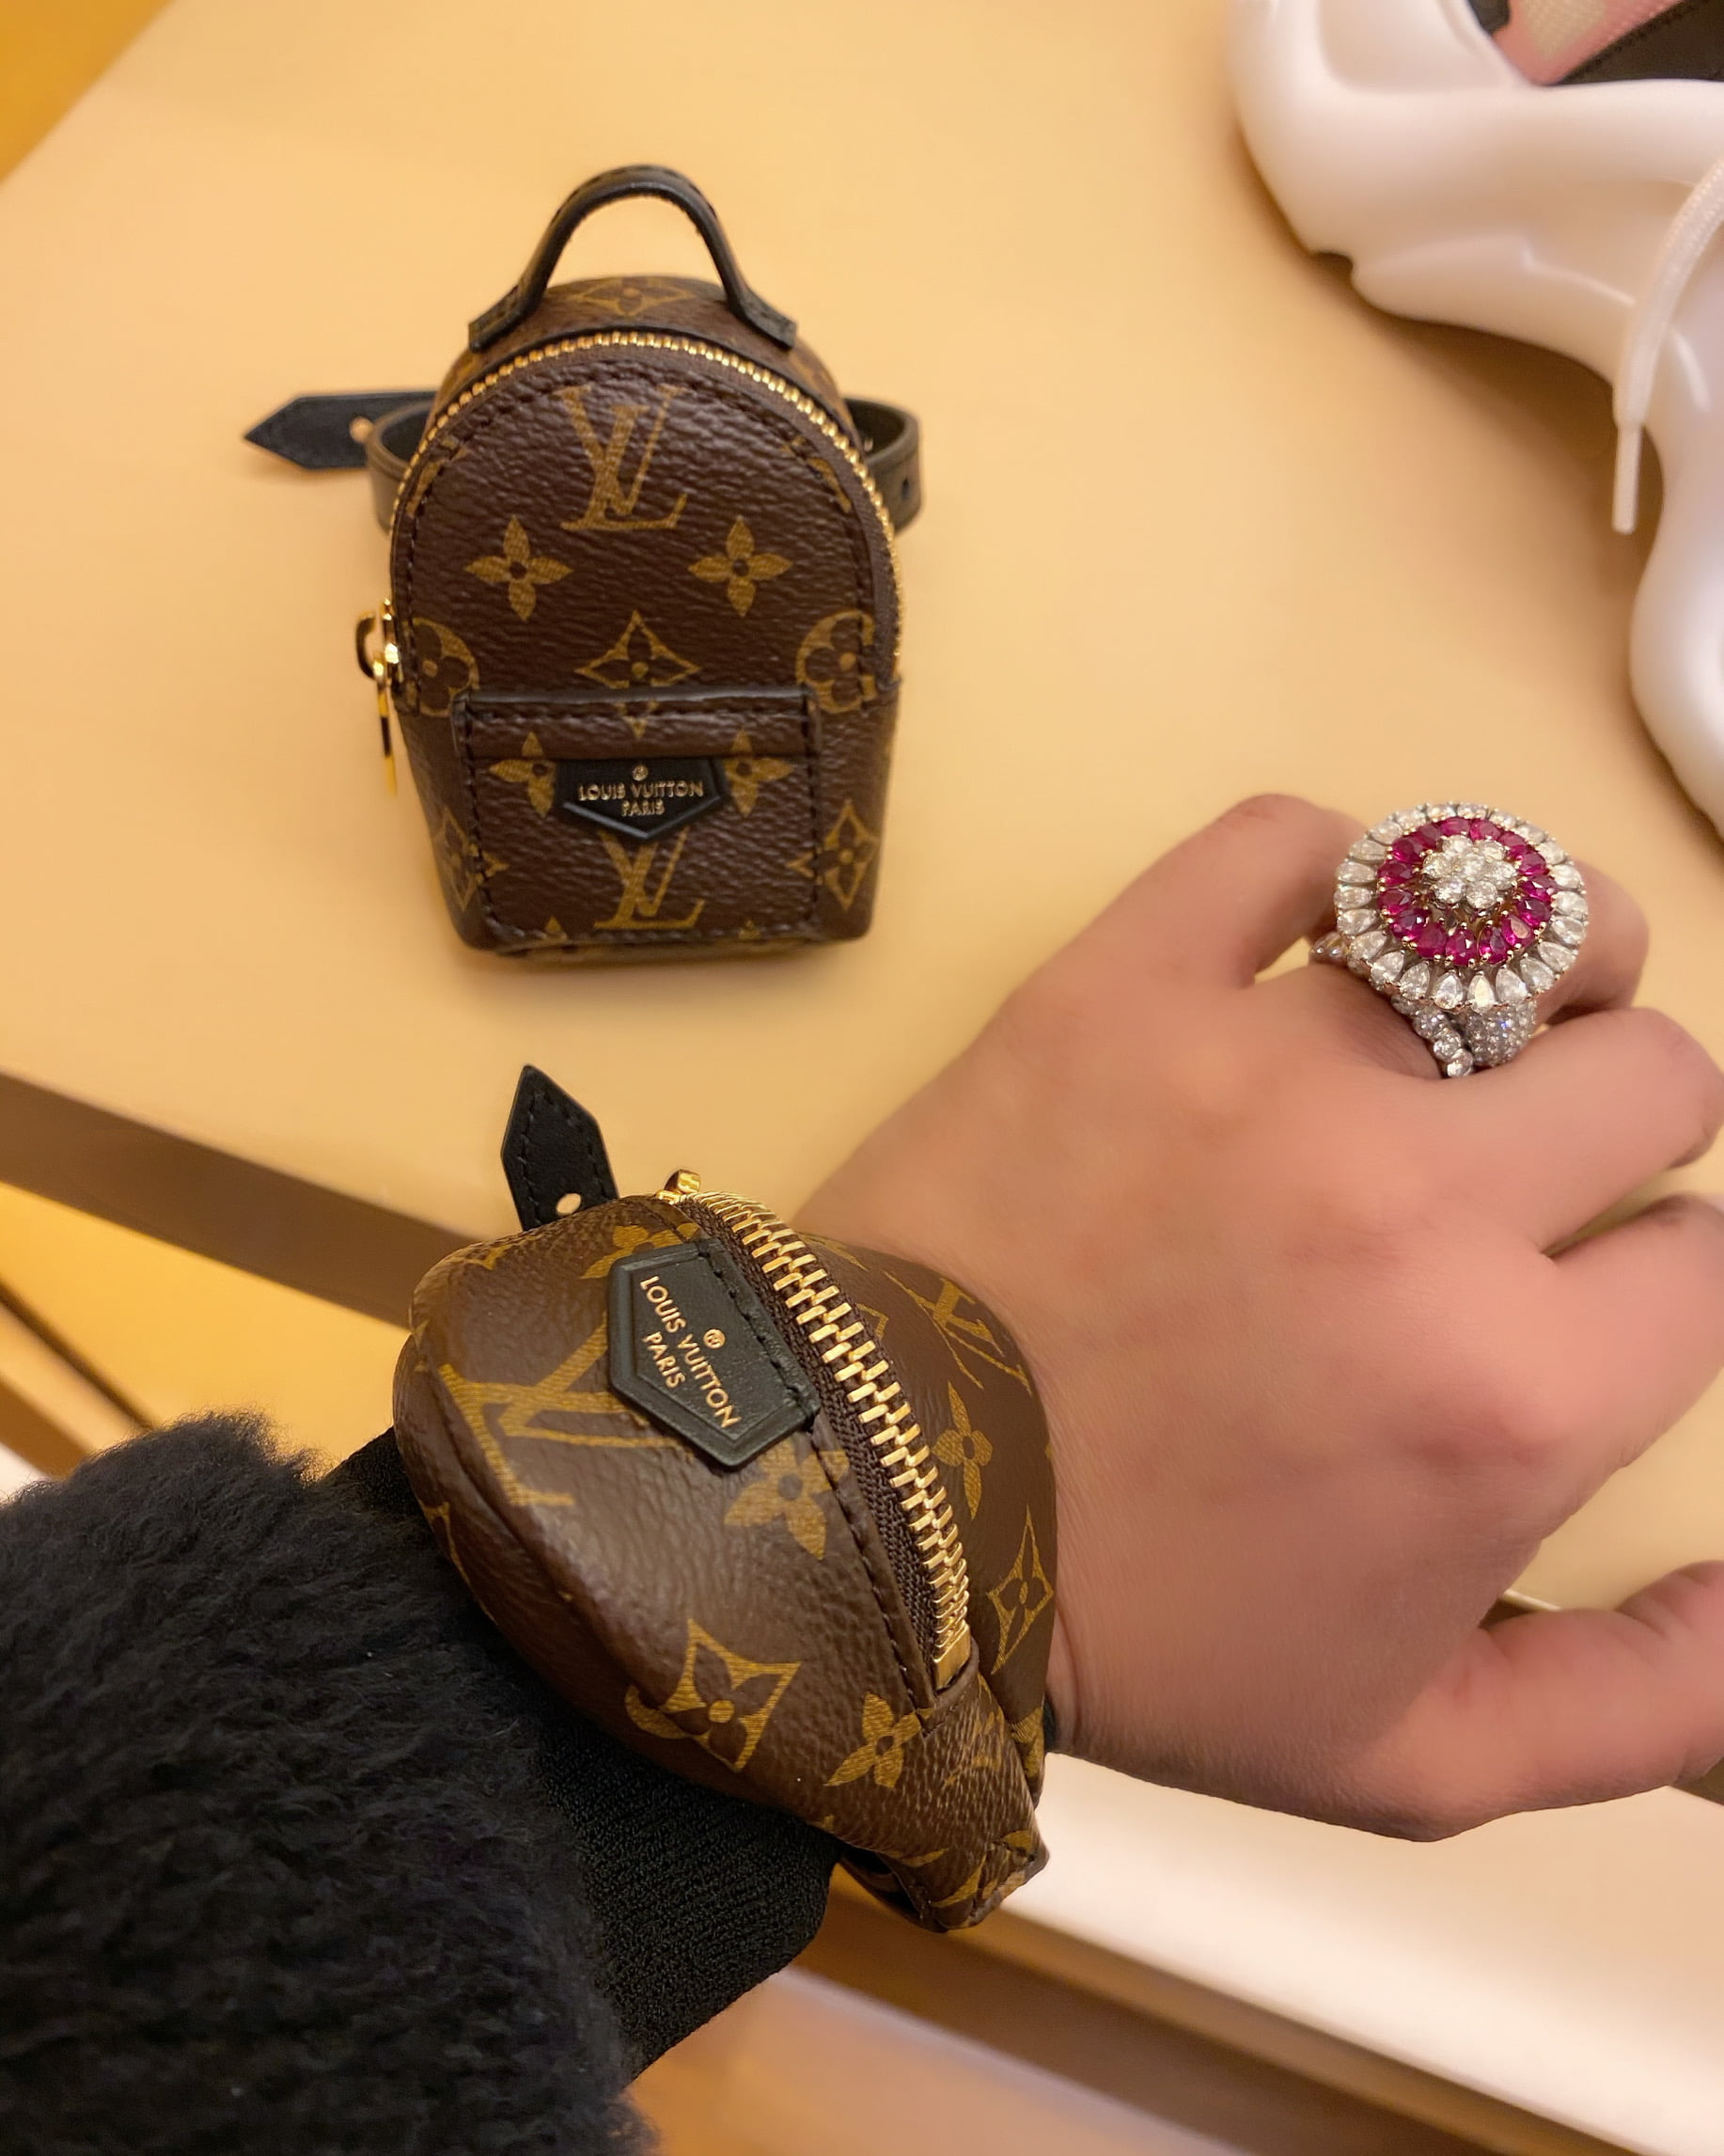 This Louis Vuitton Mini Backpack Bracelet Will Fulfill Your Festival Dreams